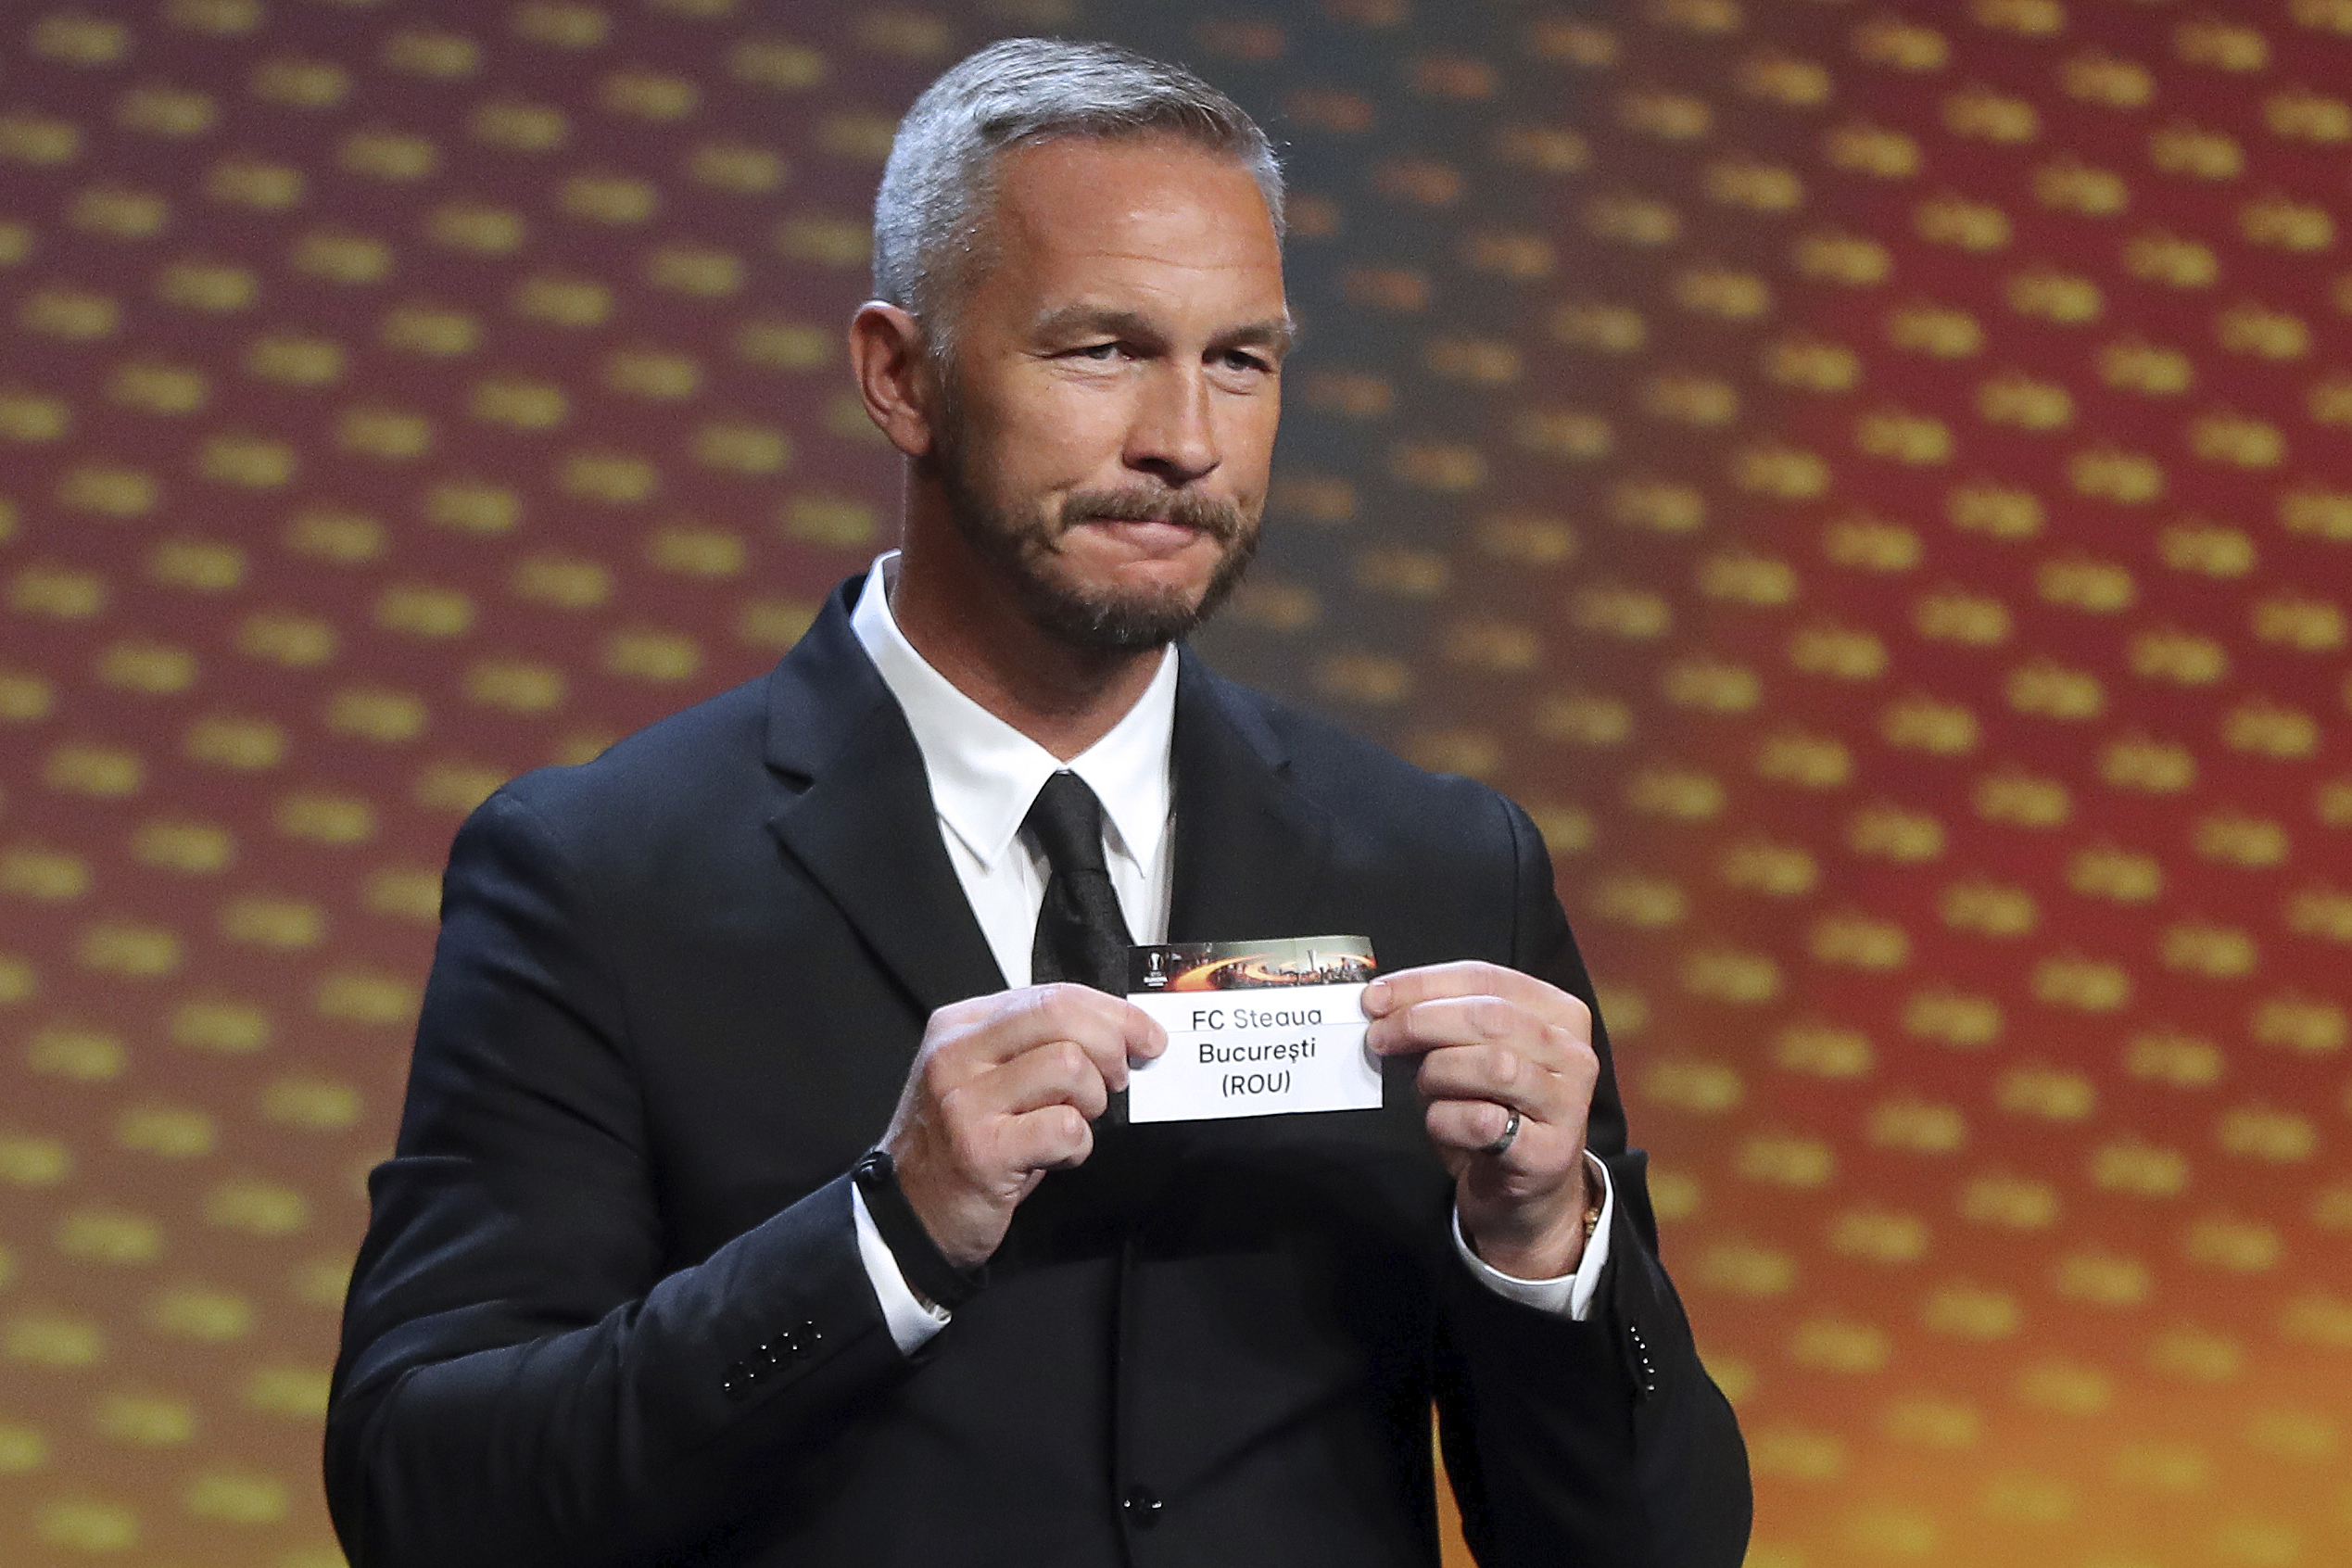 Swedish former football player Patrik Andersson shows a piece of paper bearing the name of FC Steaua Bucuresti, during the UEFA Europa League group stage draw ceremony, on August 26, 2016, in Monaco. / AFP / VALERY HACHE        (Photo credit should read VALERY HACHE/AFP/Getty Images)